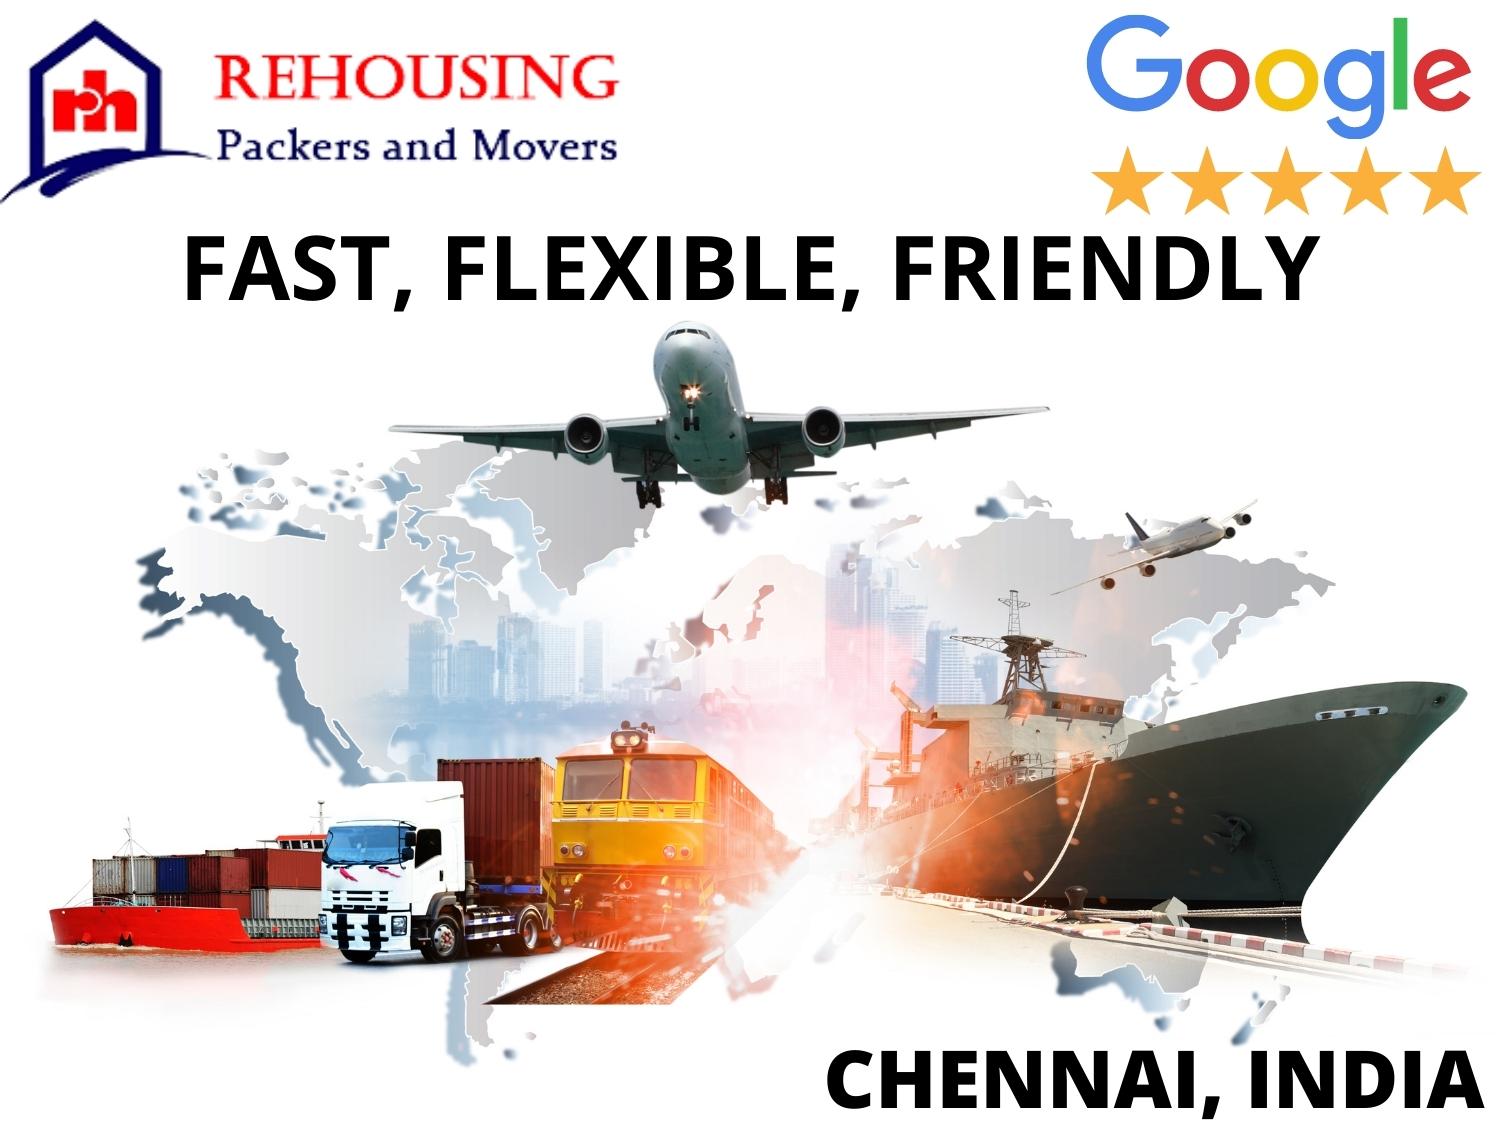 Our international courier services in Chennai